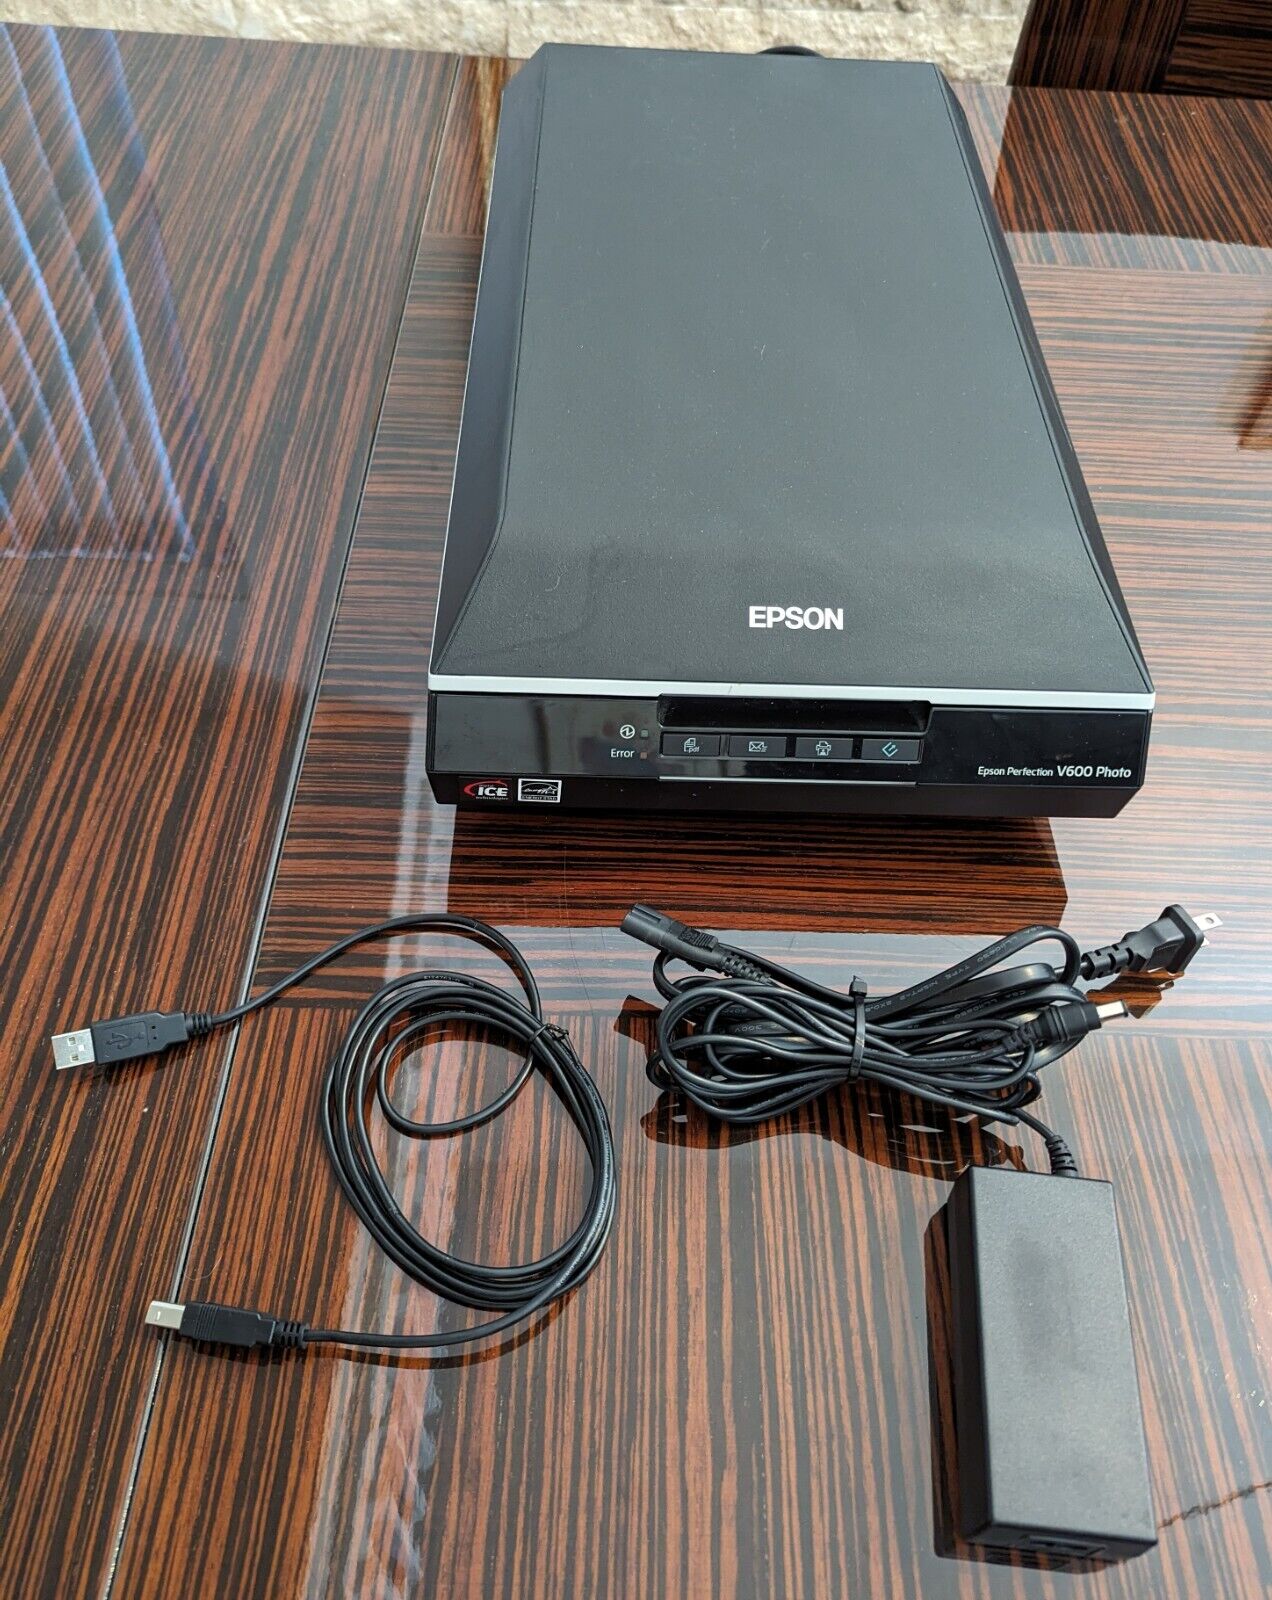 Epson Perfection V600 Photo Scanner Model J252A Tested Working